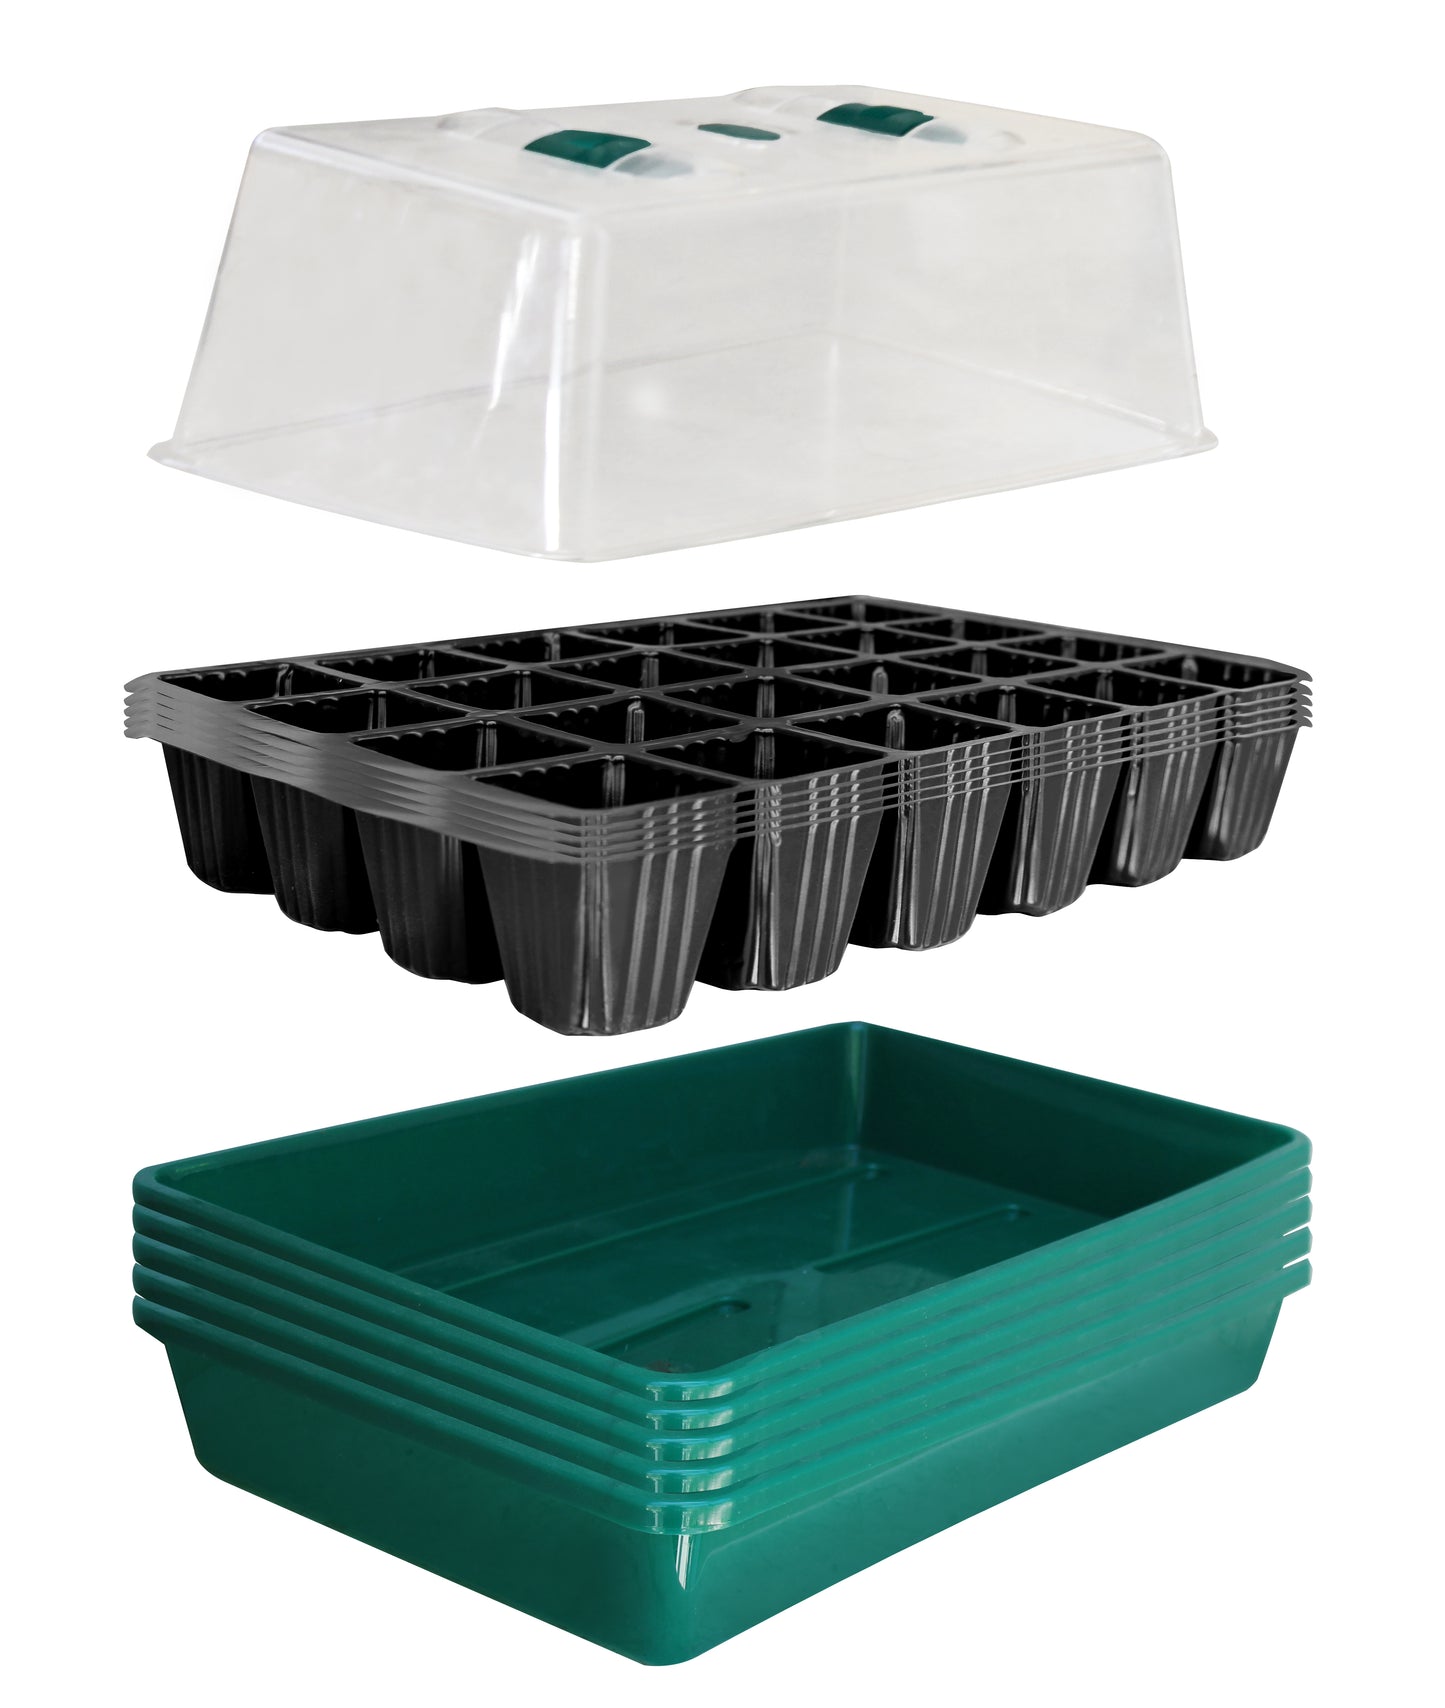 TABOR TOOLS 10-Pack Seed Starter Cell Insert for Germination Tray, Plastic 24-Cell Seedling Trays with Drain Holes. (10-Pack) TR45A.